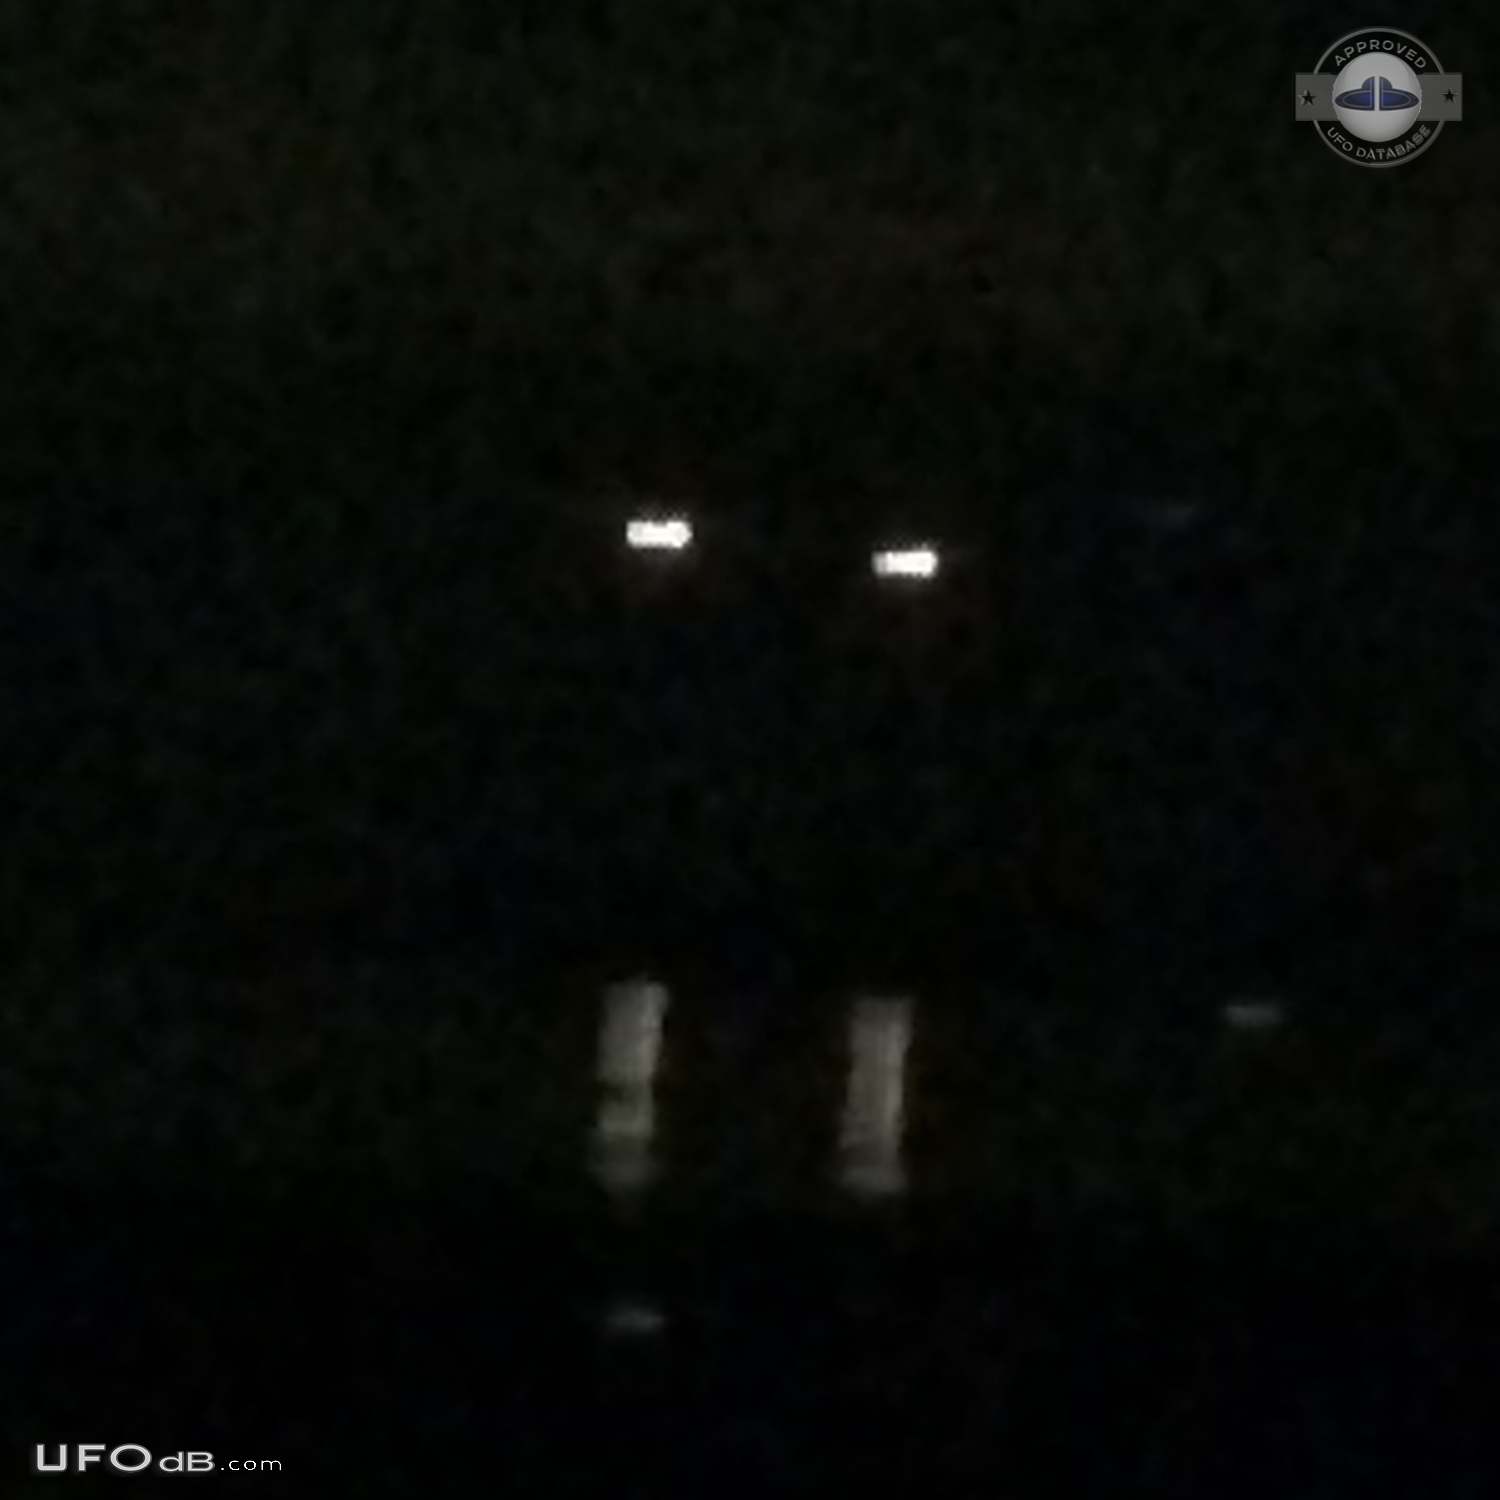 Yellowish-white UFOs with hints of red at center hovered - Clinton Was UFO Picture #755-2